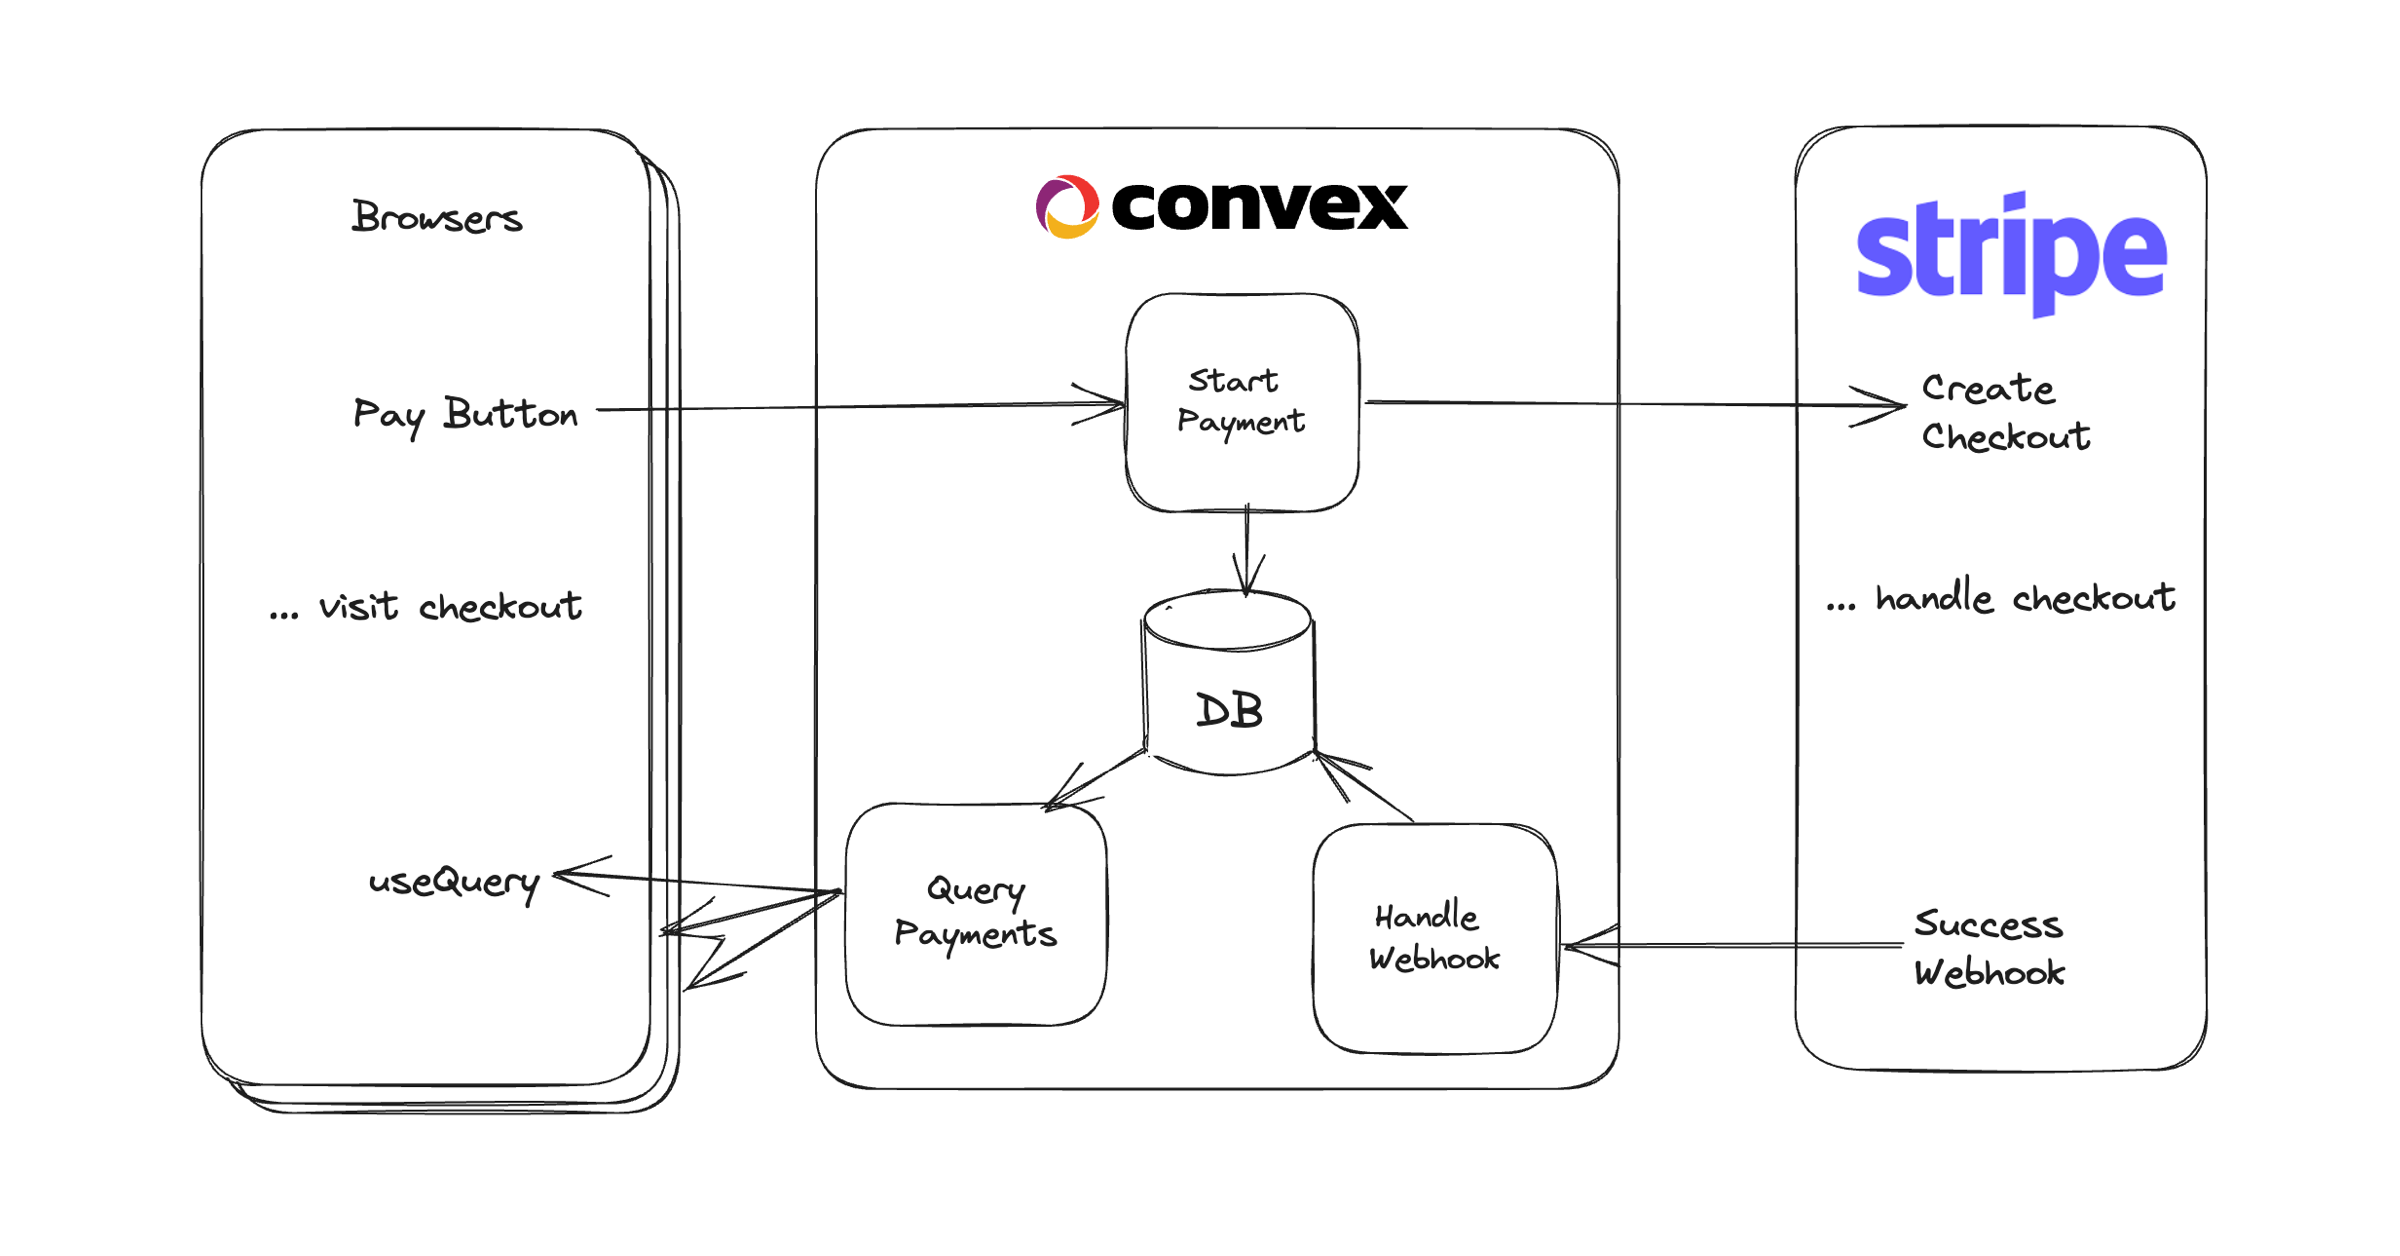 Convex starts a checkout with Stripe, then handles the success webhook